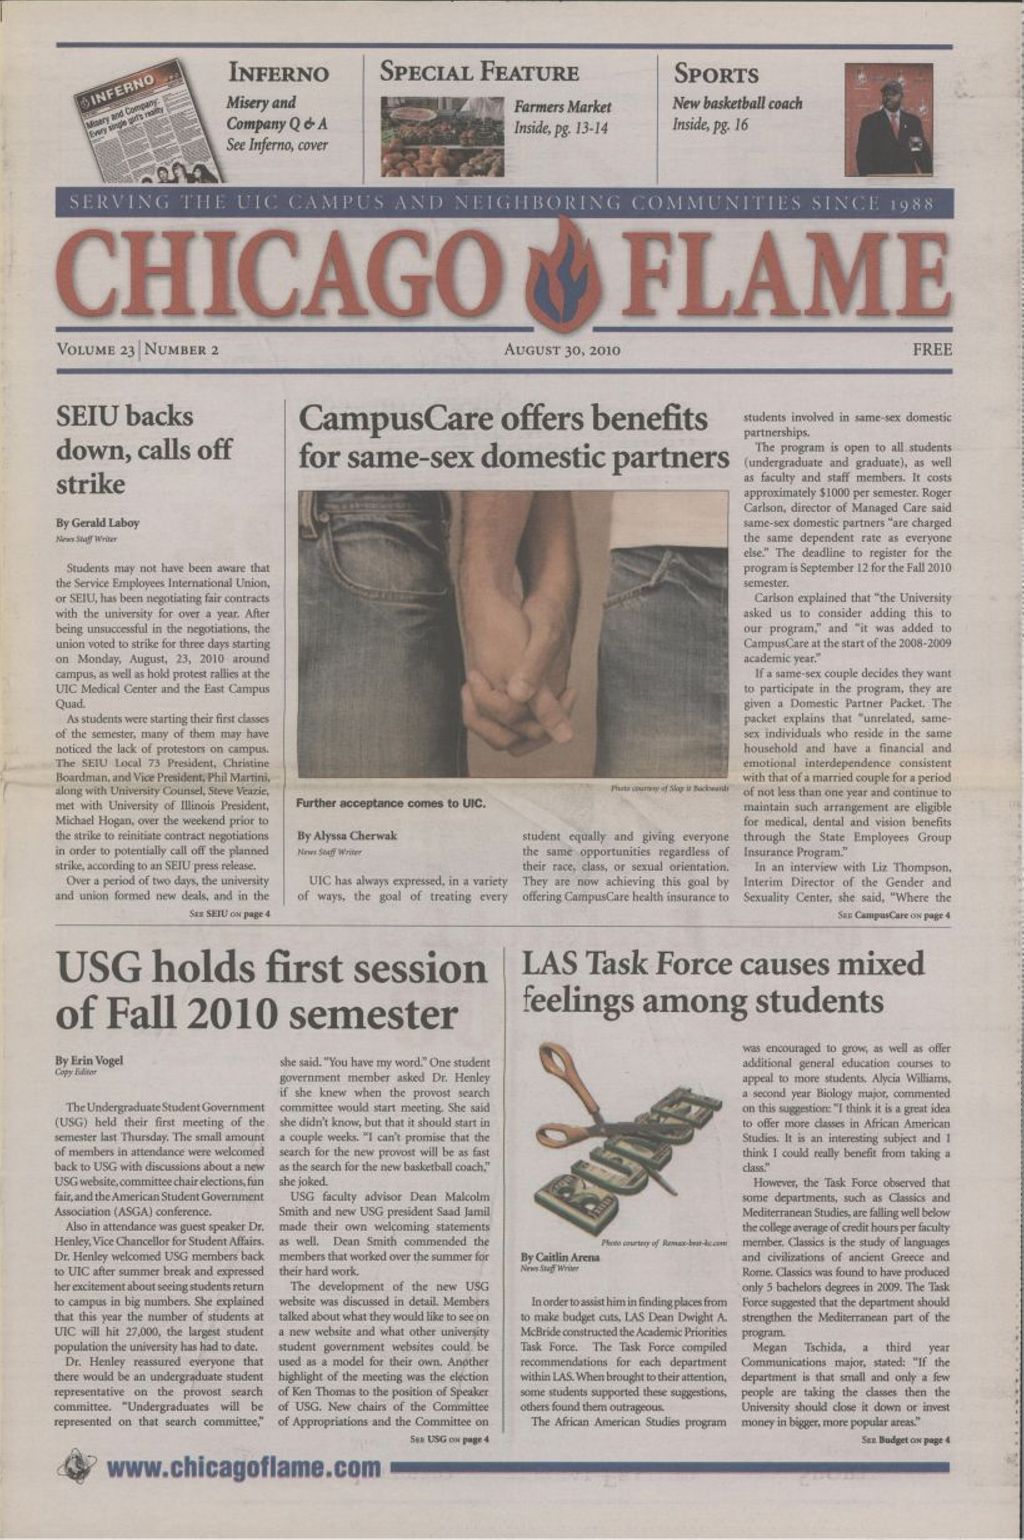 Chicago Flame (August 30, 2010)